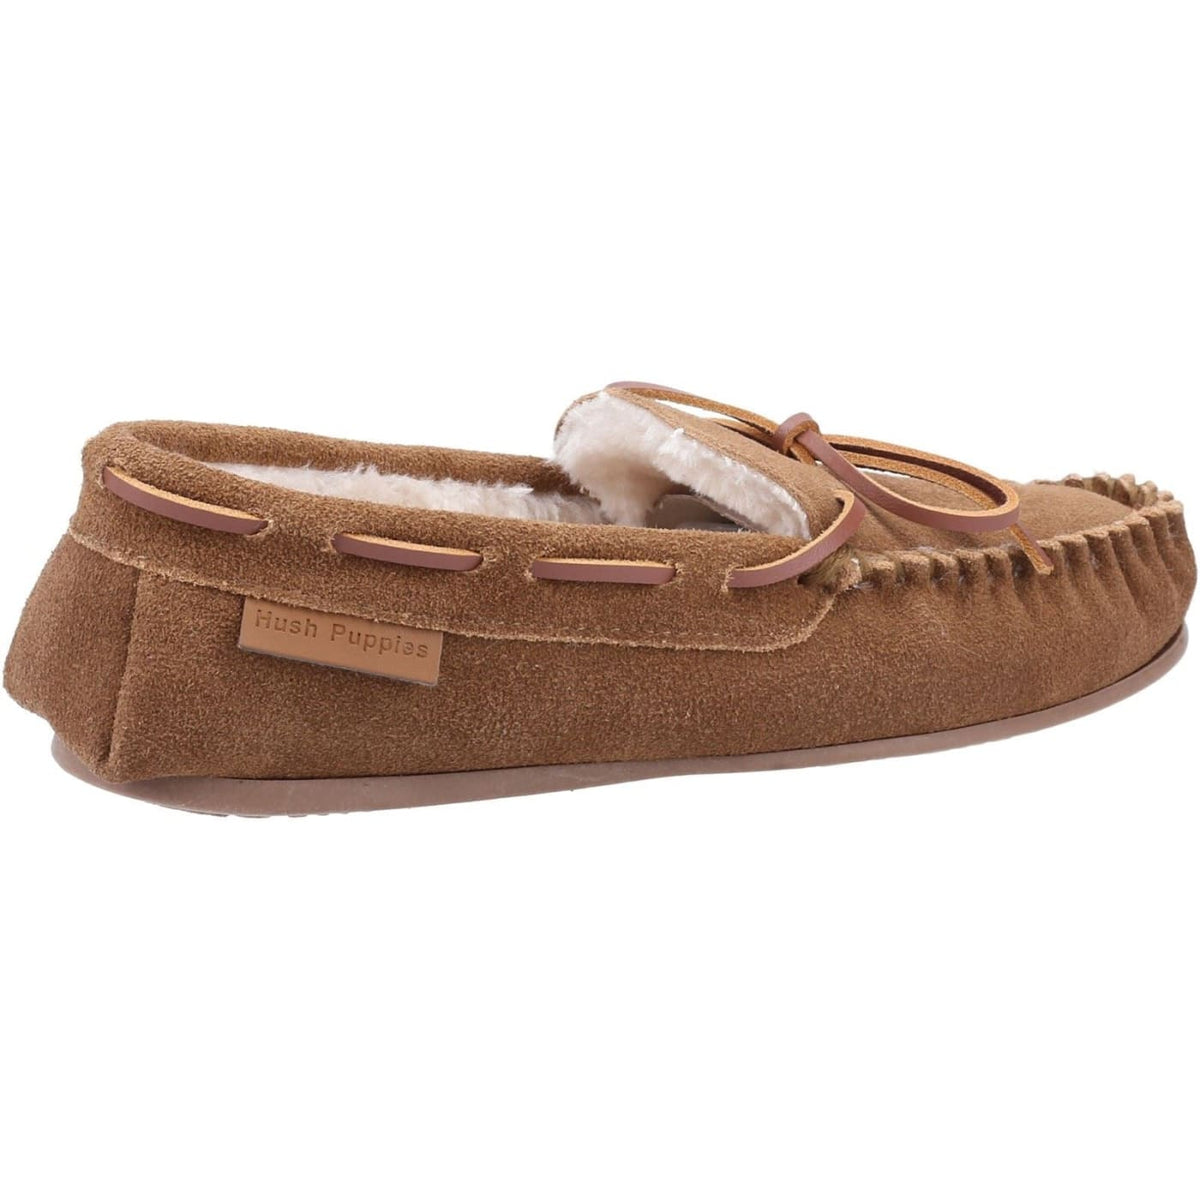 Hush Puppies Allie Tan Ladies Suede Slippers – Top Brand Shoes